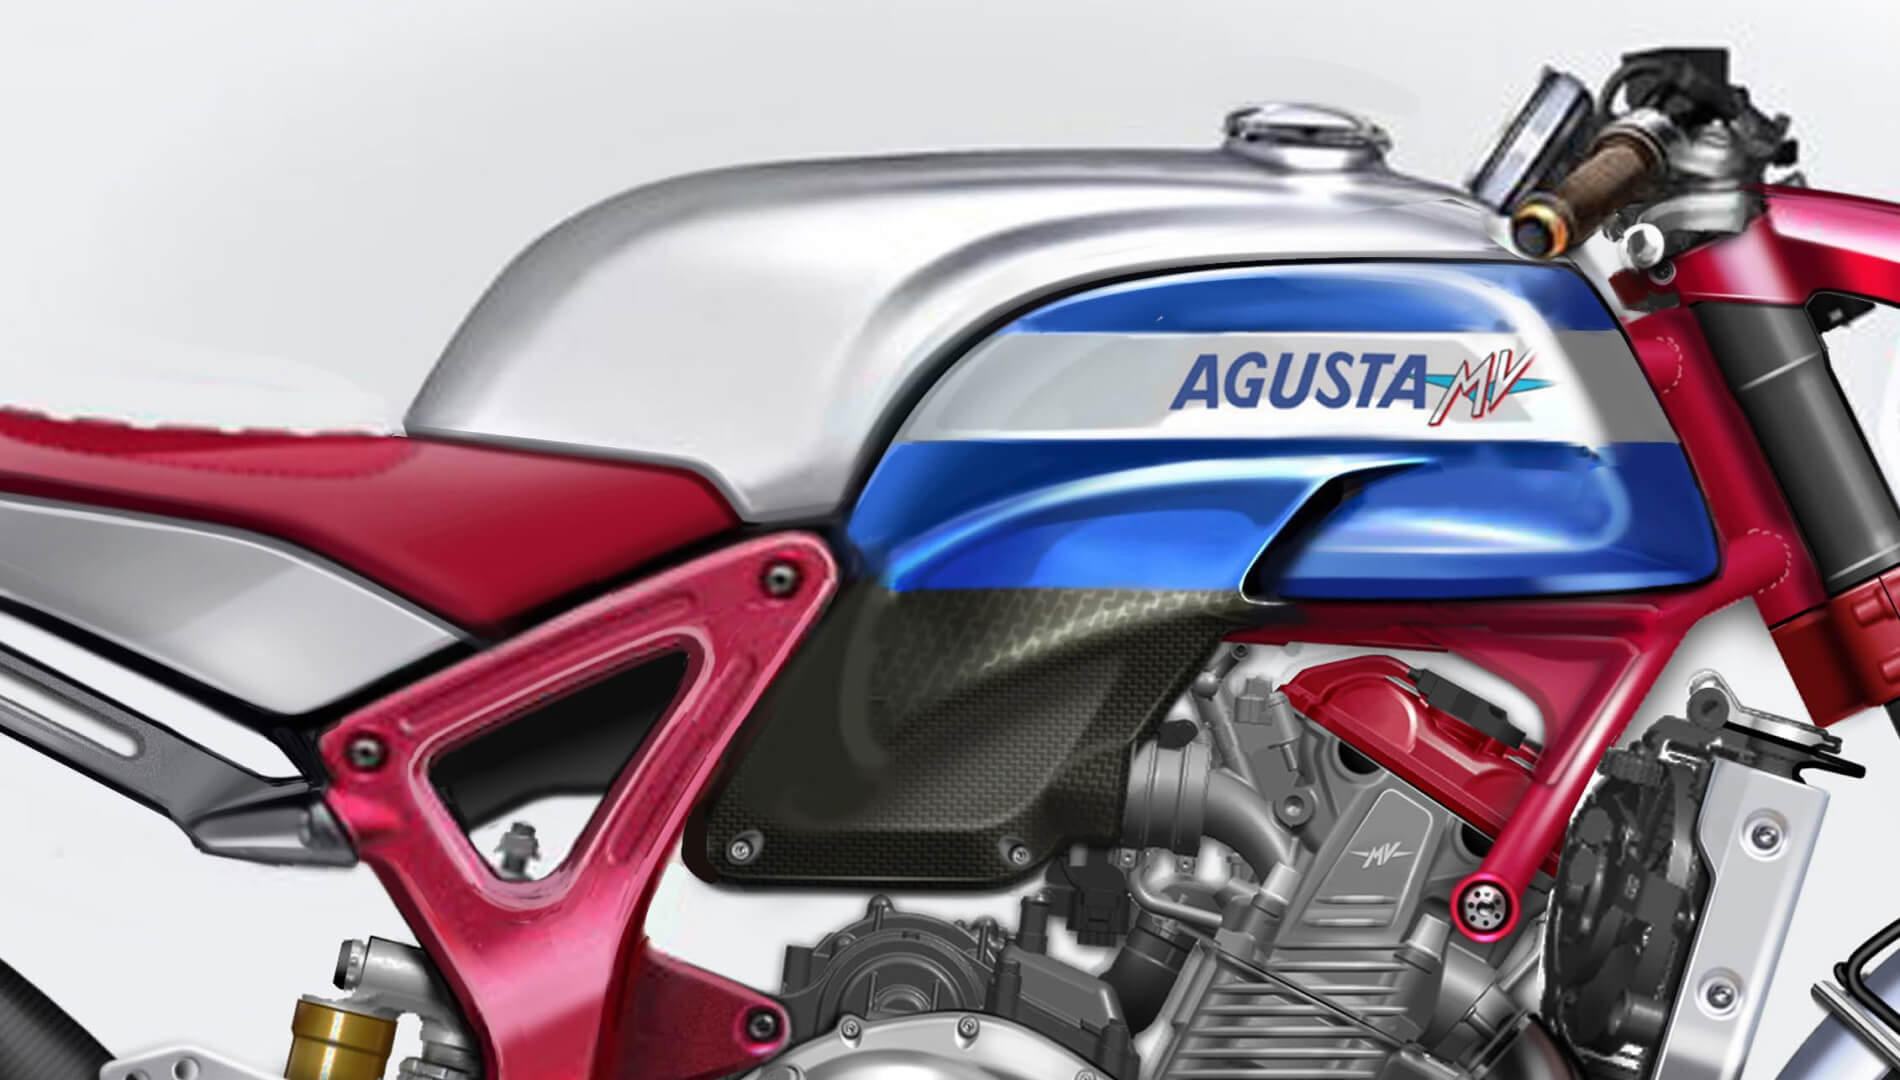 MV Agusta 921S - The Future Classic Motorcycle